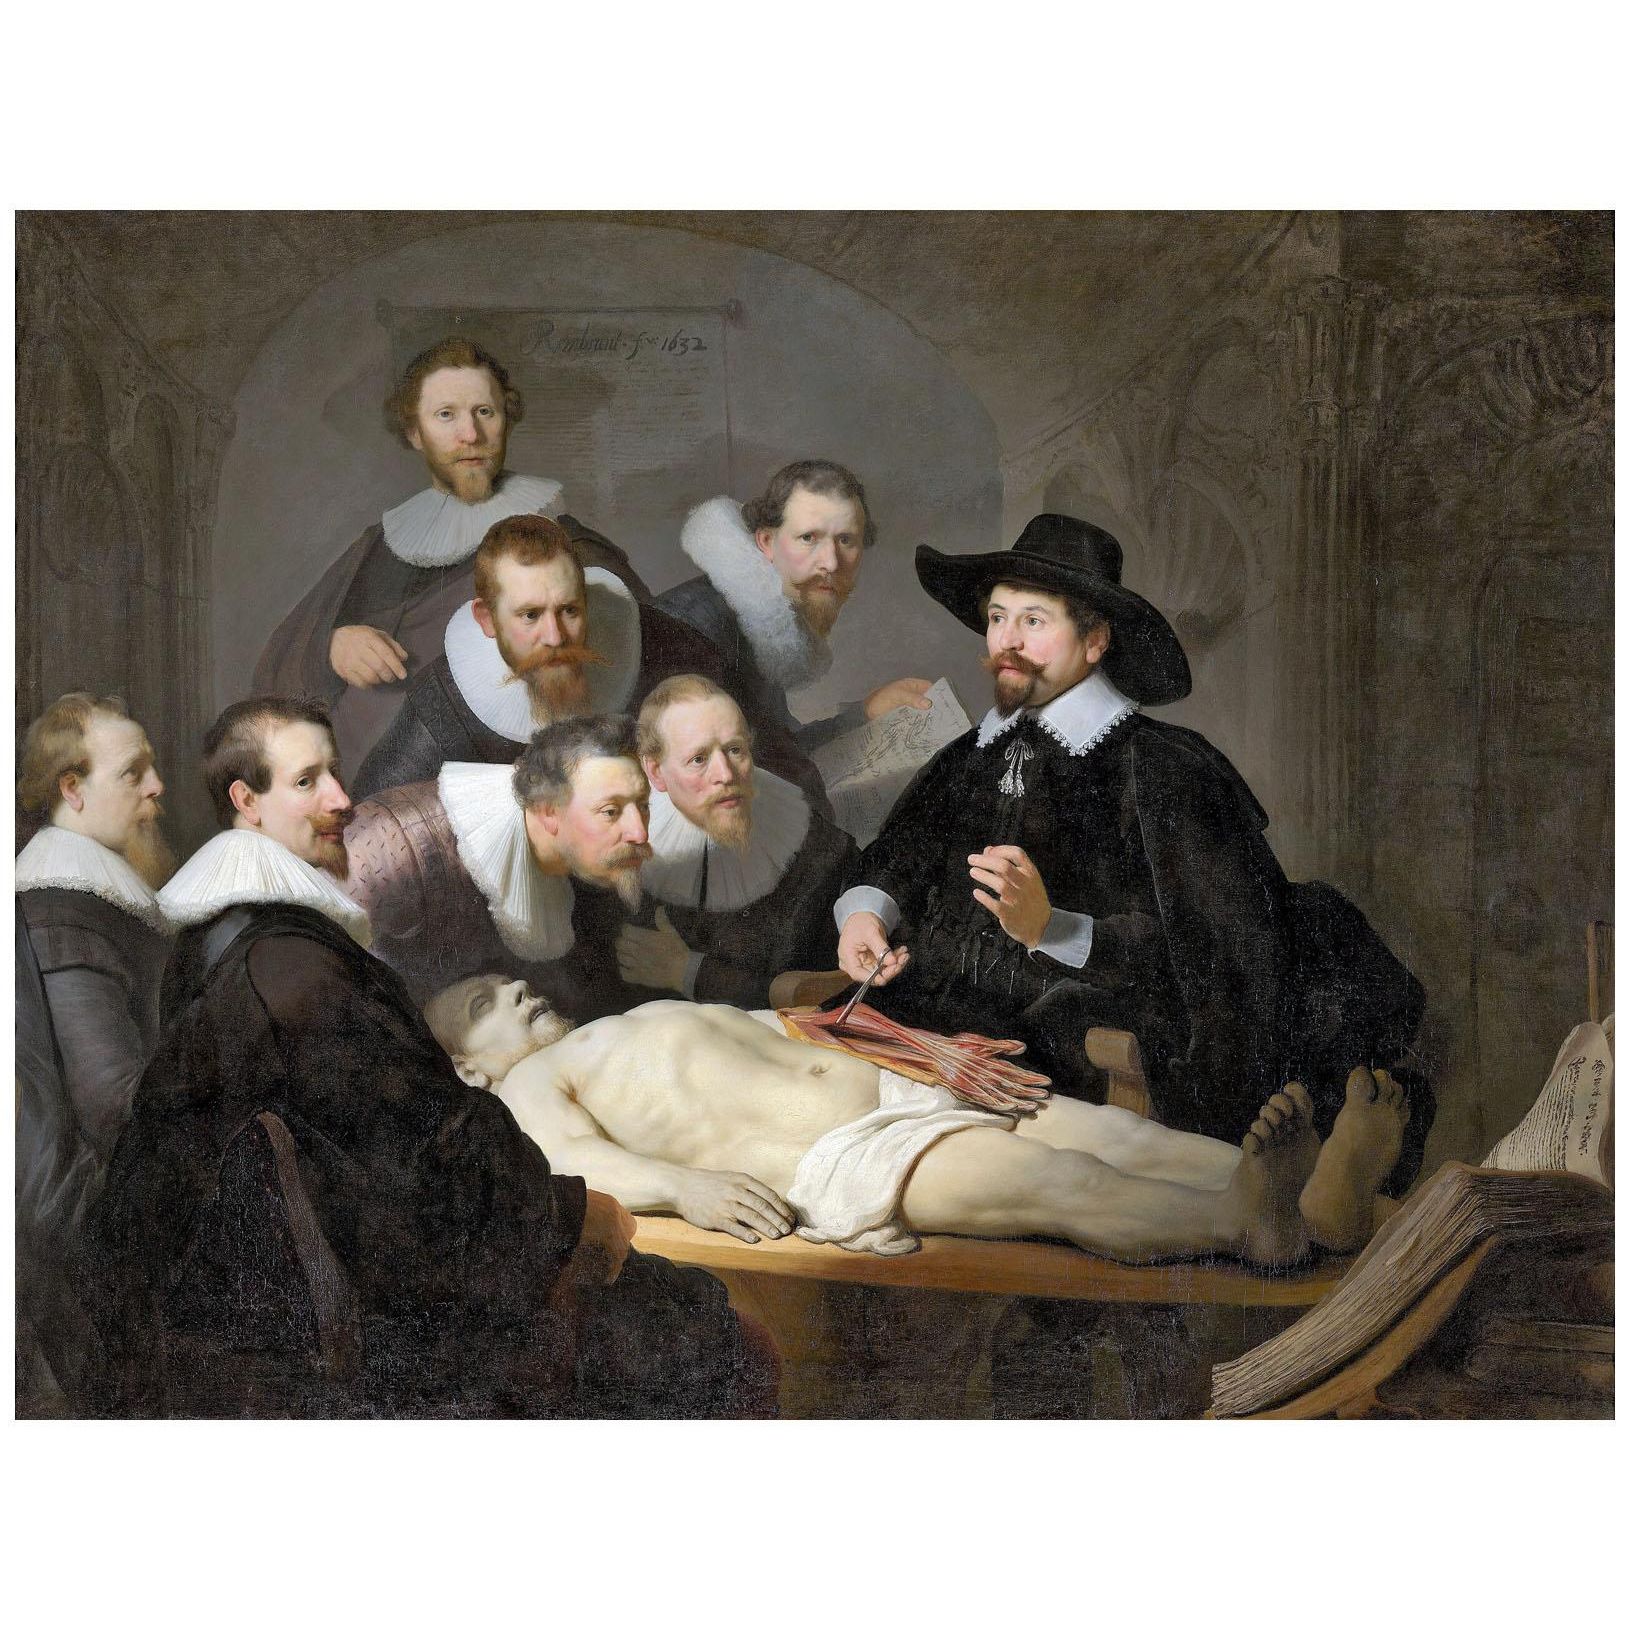 Rembrandt. The Anatomy Lesson of Dr. Tulp. 1632. Mauritshuis Den Haag